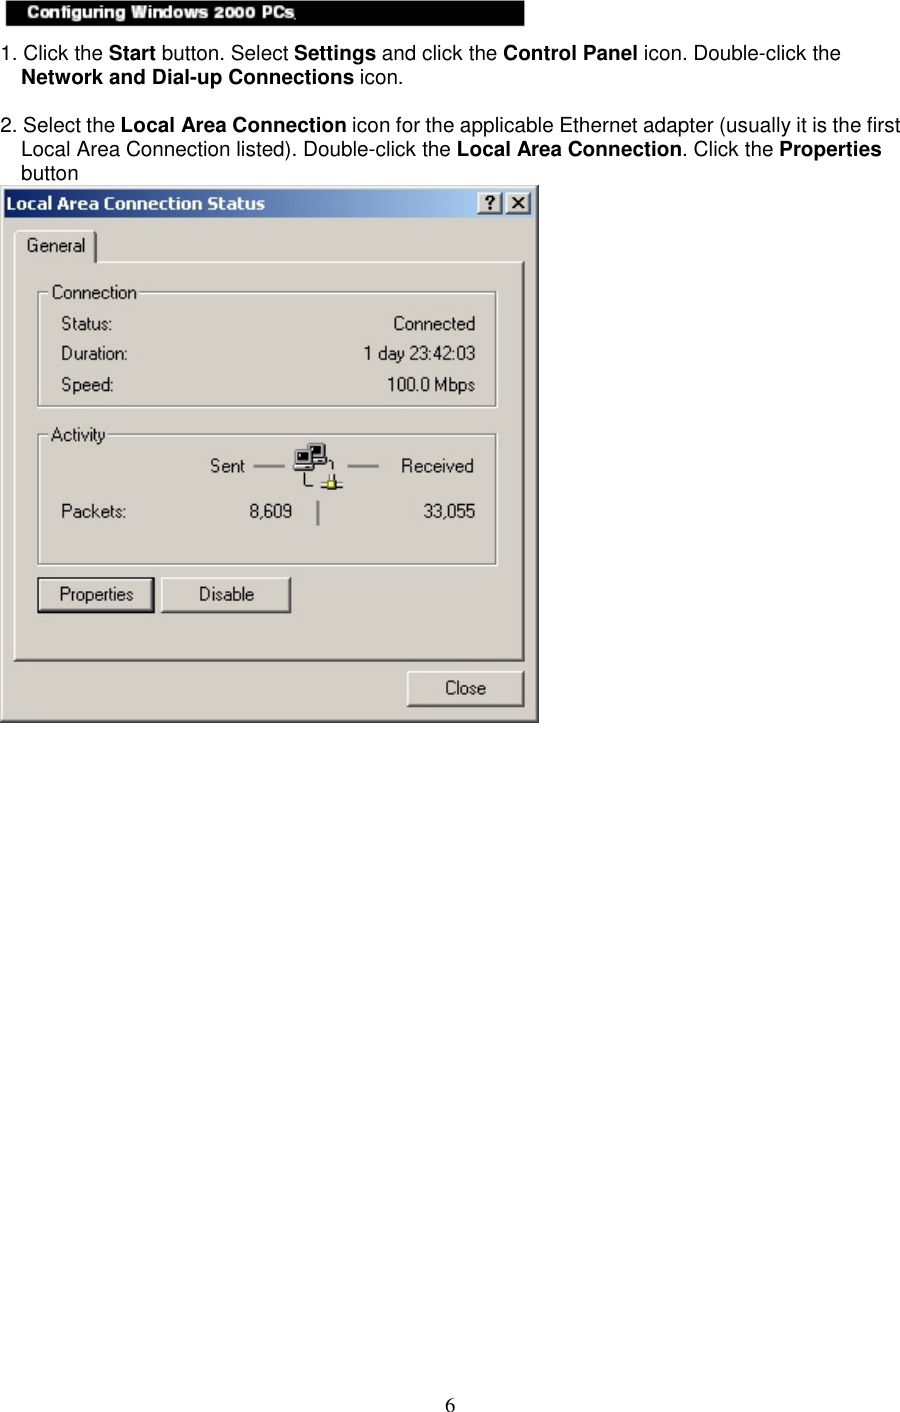  6 1. Click the Start button. Select Settings and click the Control Panel icon. Double-click the Network and Dial-up Connections icon.  2. Select the Local Area Connection icon for the applicable Ethernet adapter (usually it is the first Local Area Connection listed). Double-click the Local Area Connection. Click the Properties button                           